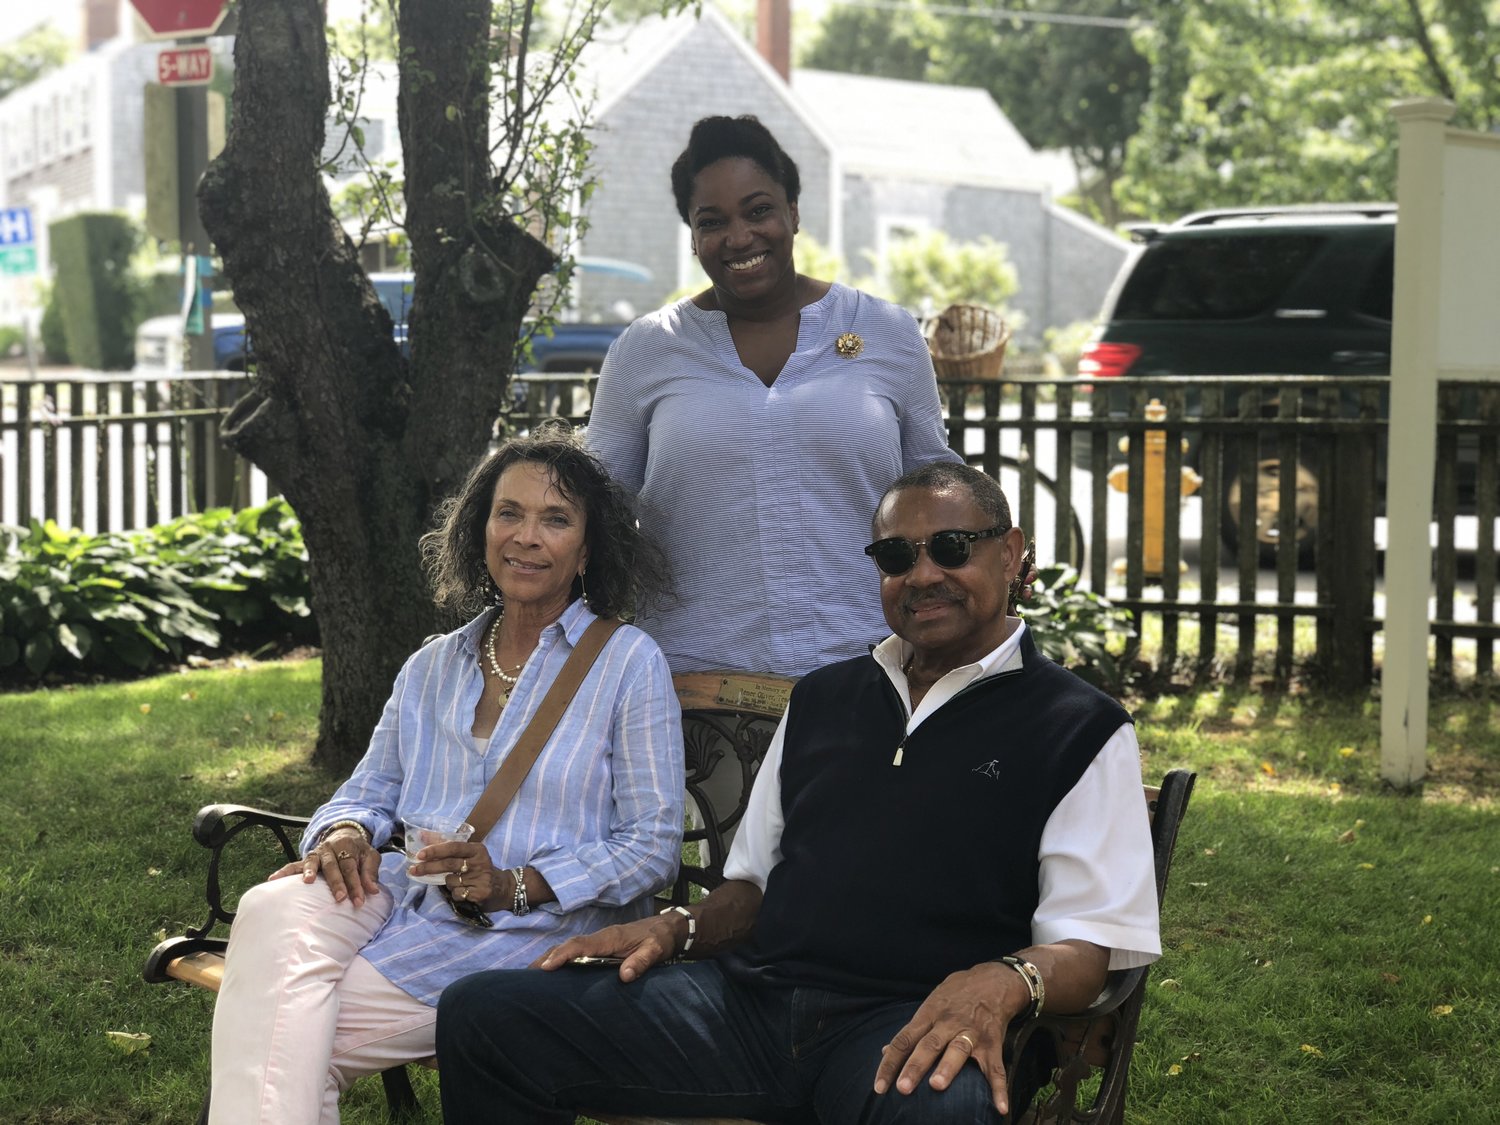  Skip &amp; his wife, Karen,  with Marita Rivero, Executive Director, Museum of African American History Boston/Nantucket. For the Annual Spriggs Lecture on Nantucket at the African Meeting House. 